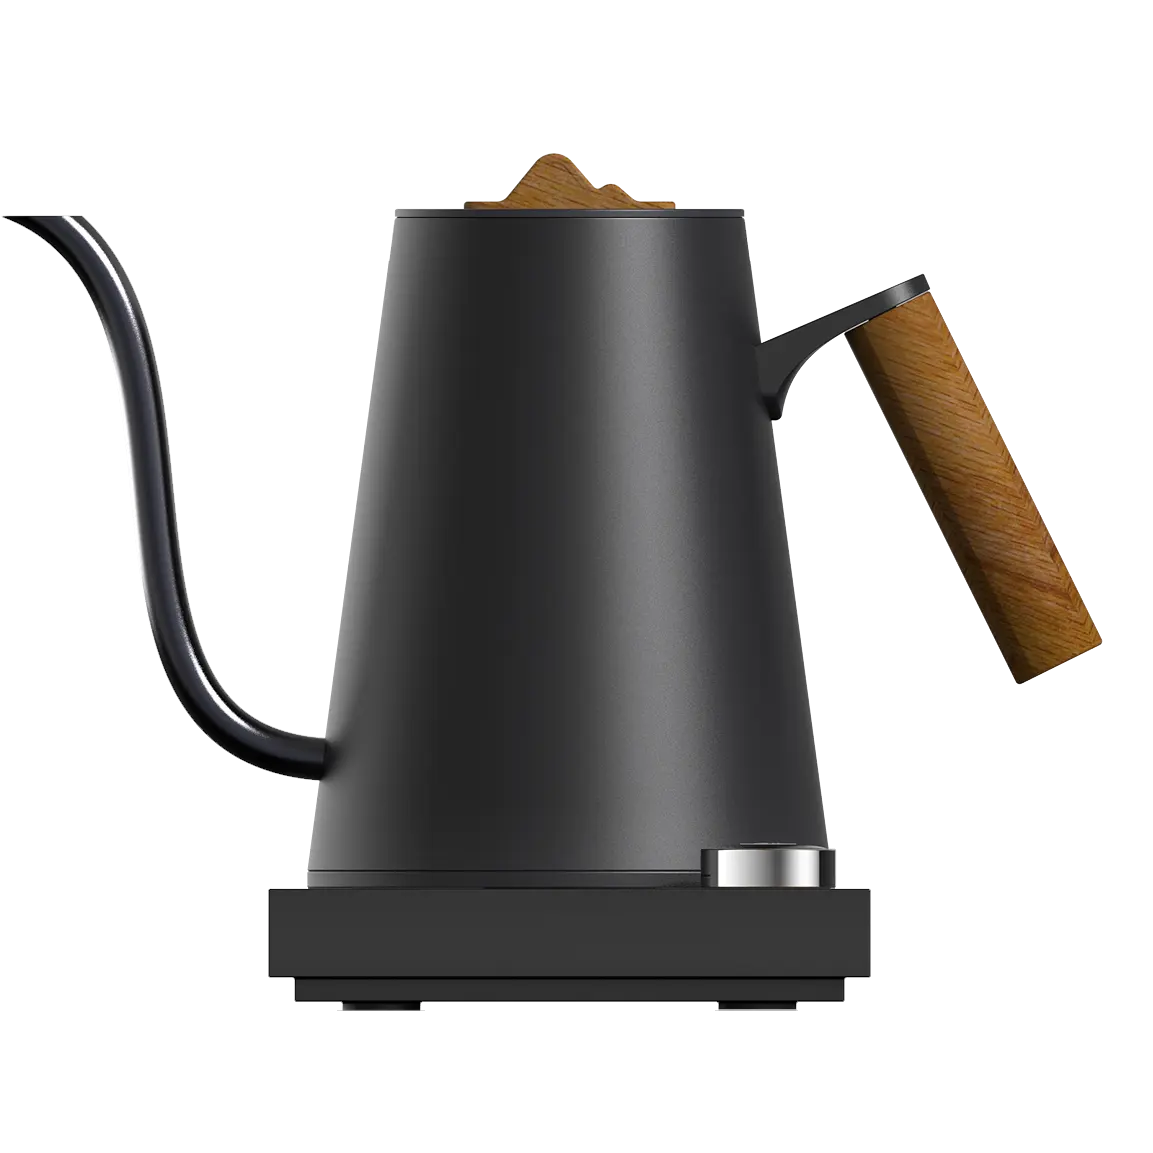 Asia Hot Sale Stainless Steel Electric Coffee Kettle Smart Variable Temperature Setting Thermos Gooseneck Kettle